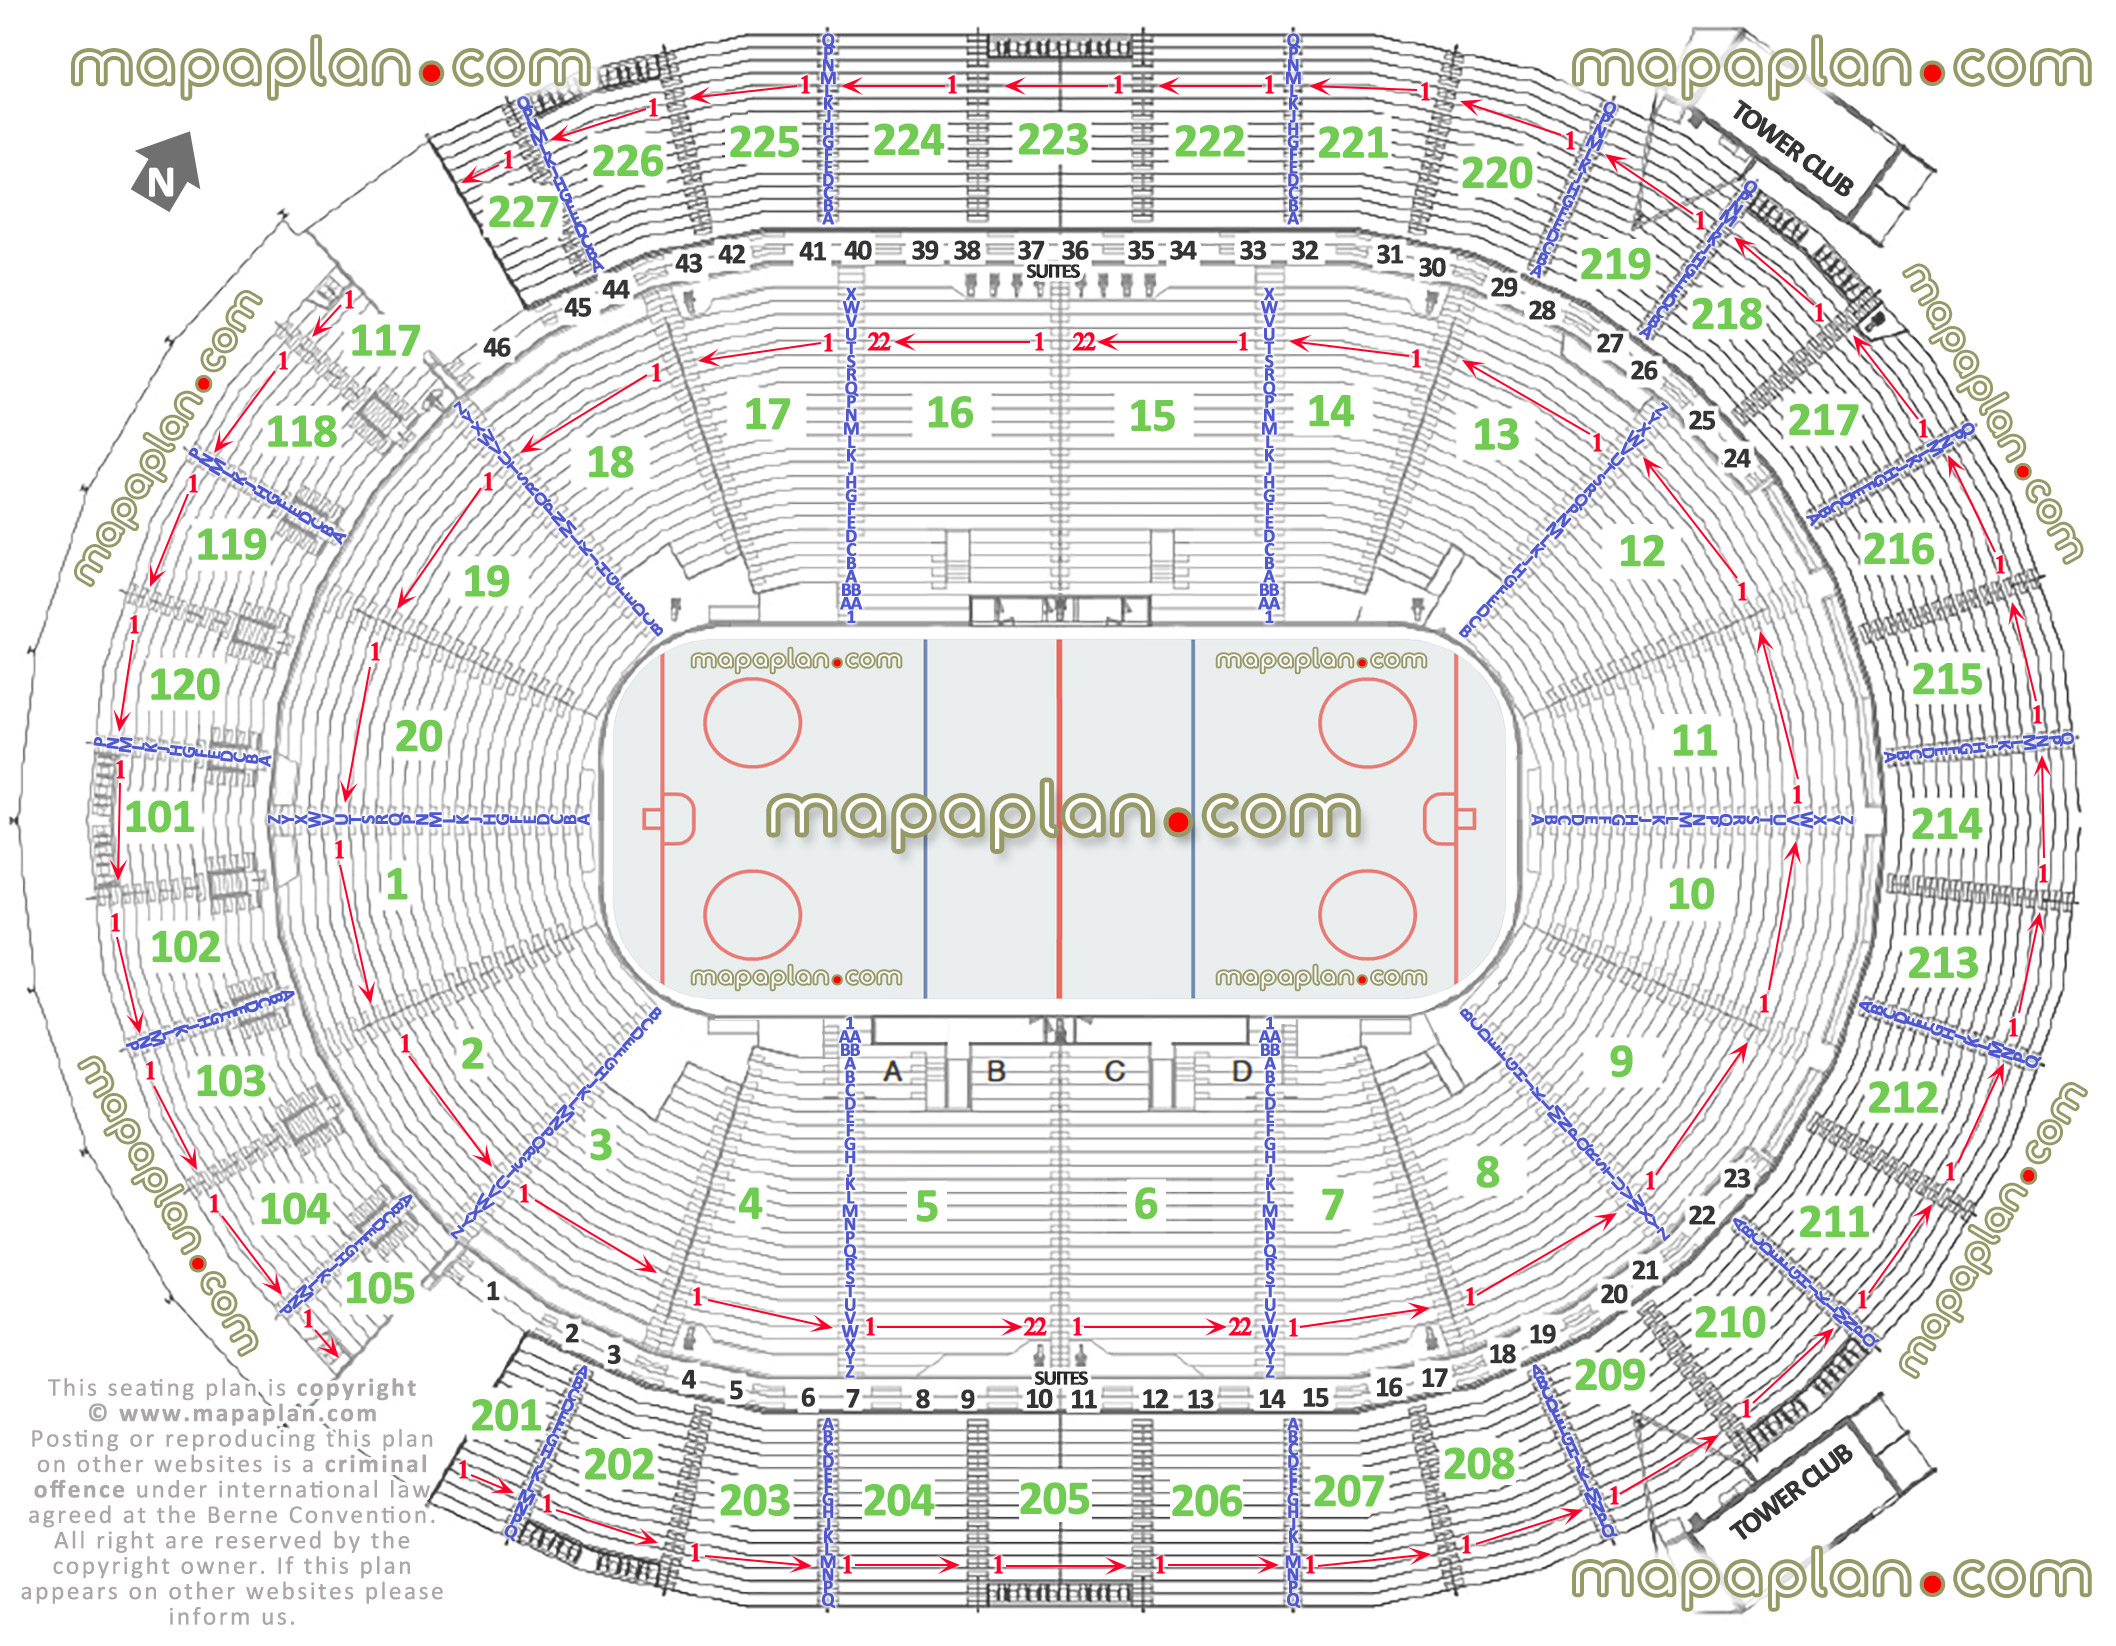 ice hockey games las vegas nv usa detailed seating capacity arrangement nhl arena row numbers layout lower upper level lounges main entrance gate exits map west east south north detailed fully seated chart setup standing room only sro areas wheelchair disabled handicap accessible seats plan Las Vegas New T-Mobile Arena MGM-AEG seating chart